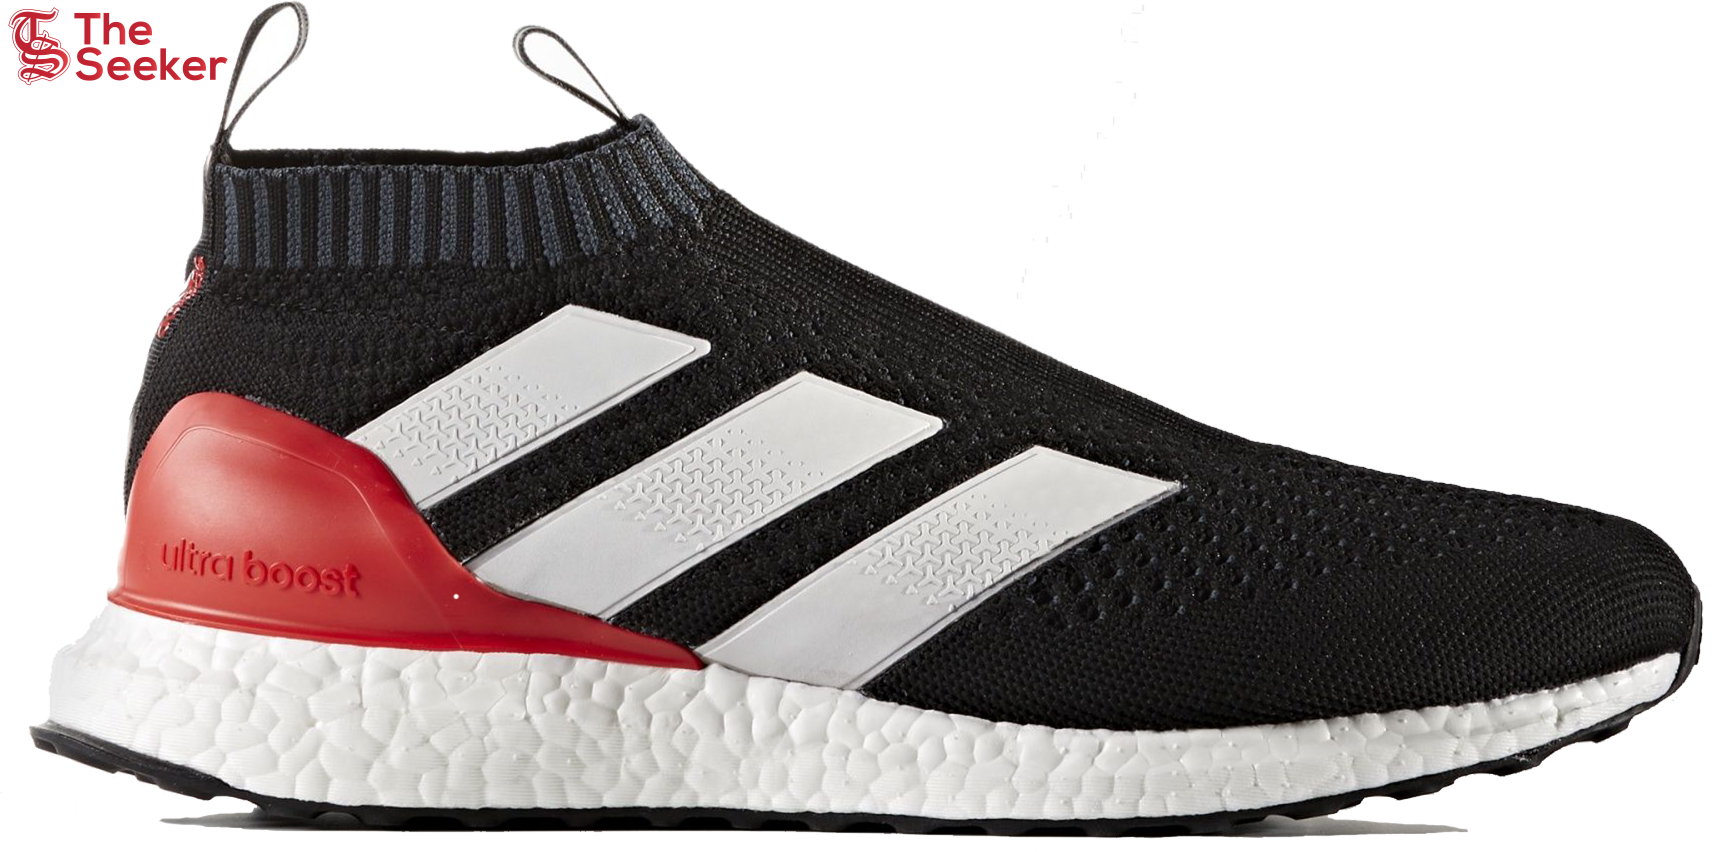 adidas PureControl Ultra Boost Black Red